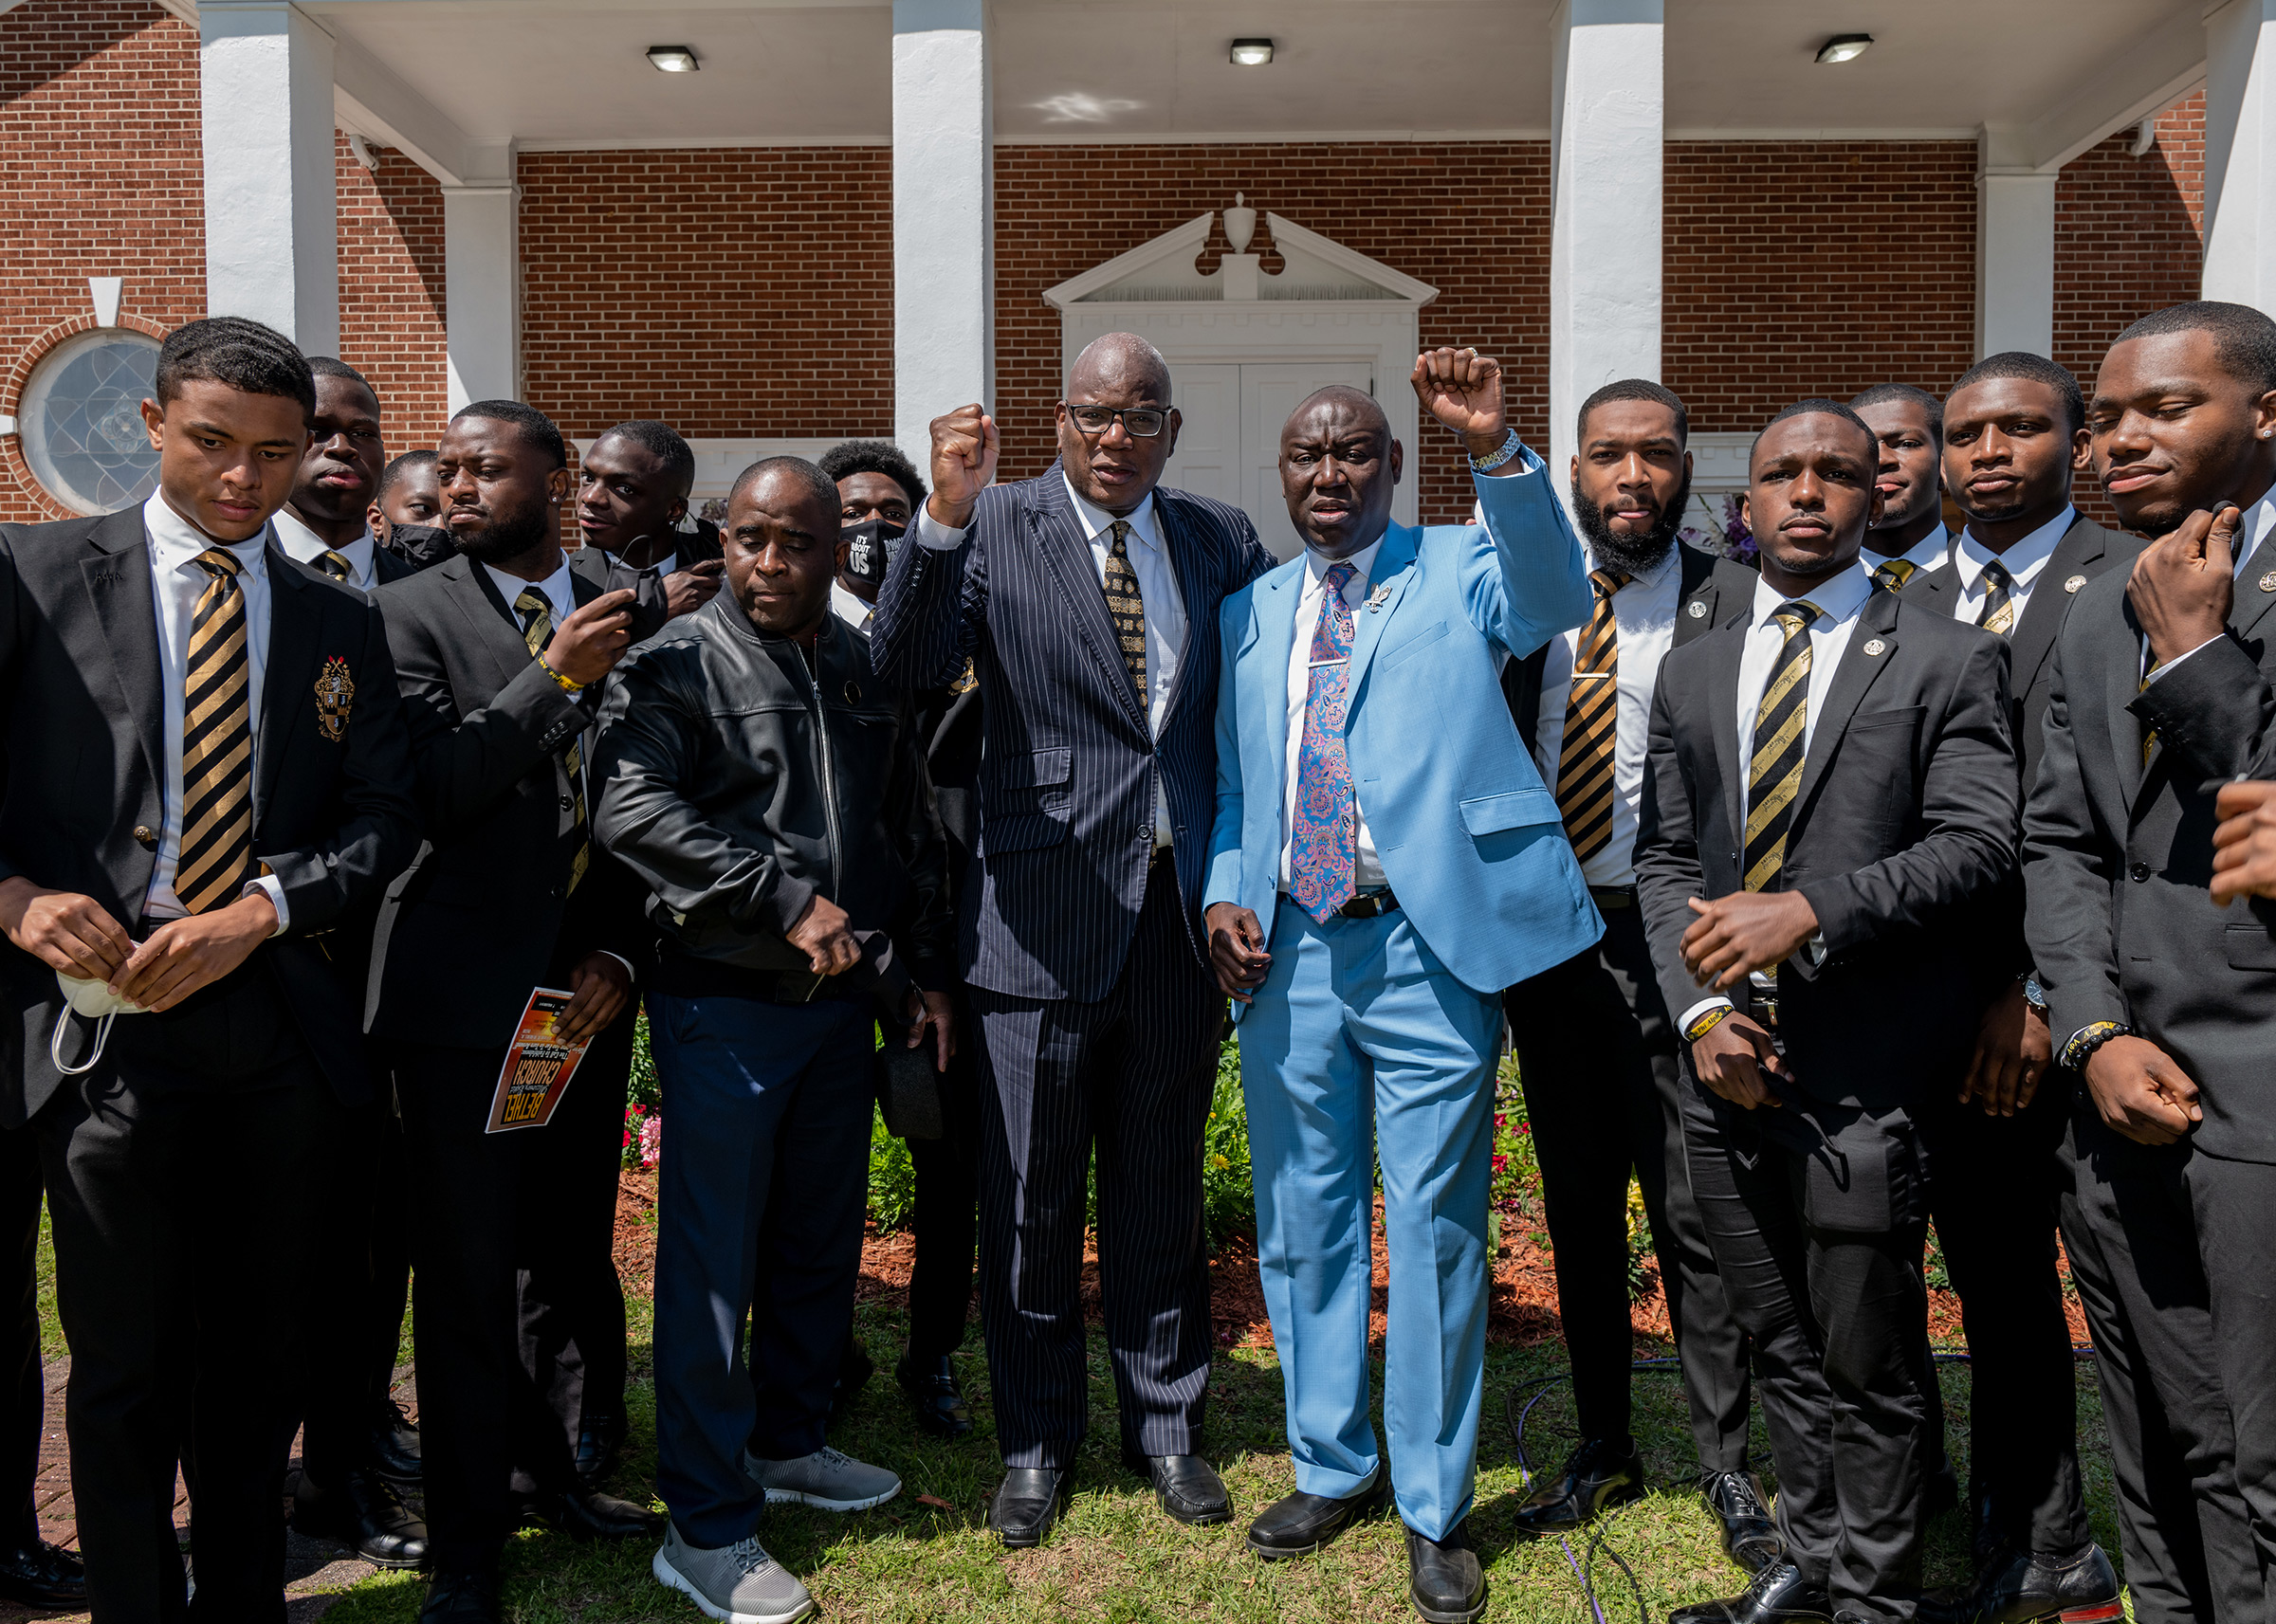 Crump poses for a photo with pastor Holmes of the Bethel Missionary Baptist Church and members of Alpha Phi Alpha after Easter Sunday Mass at in Tallahassee, Fla., on April 4. (Ruddy Roye for TIME)